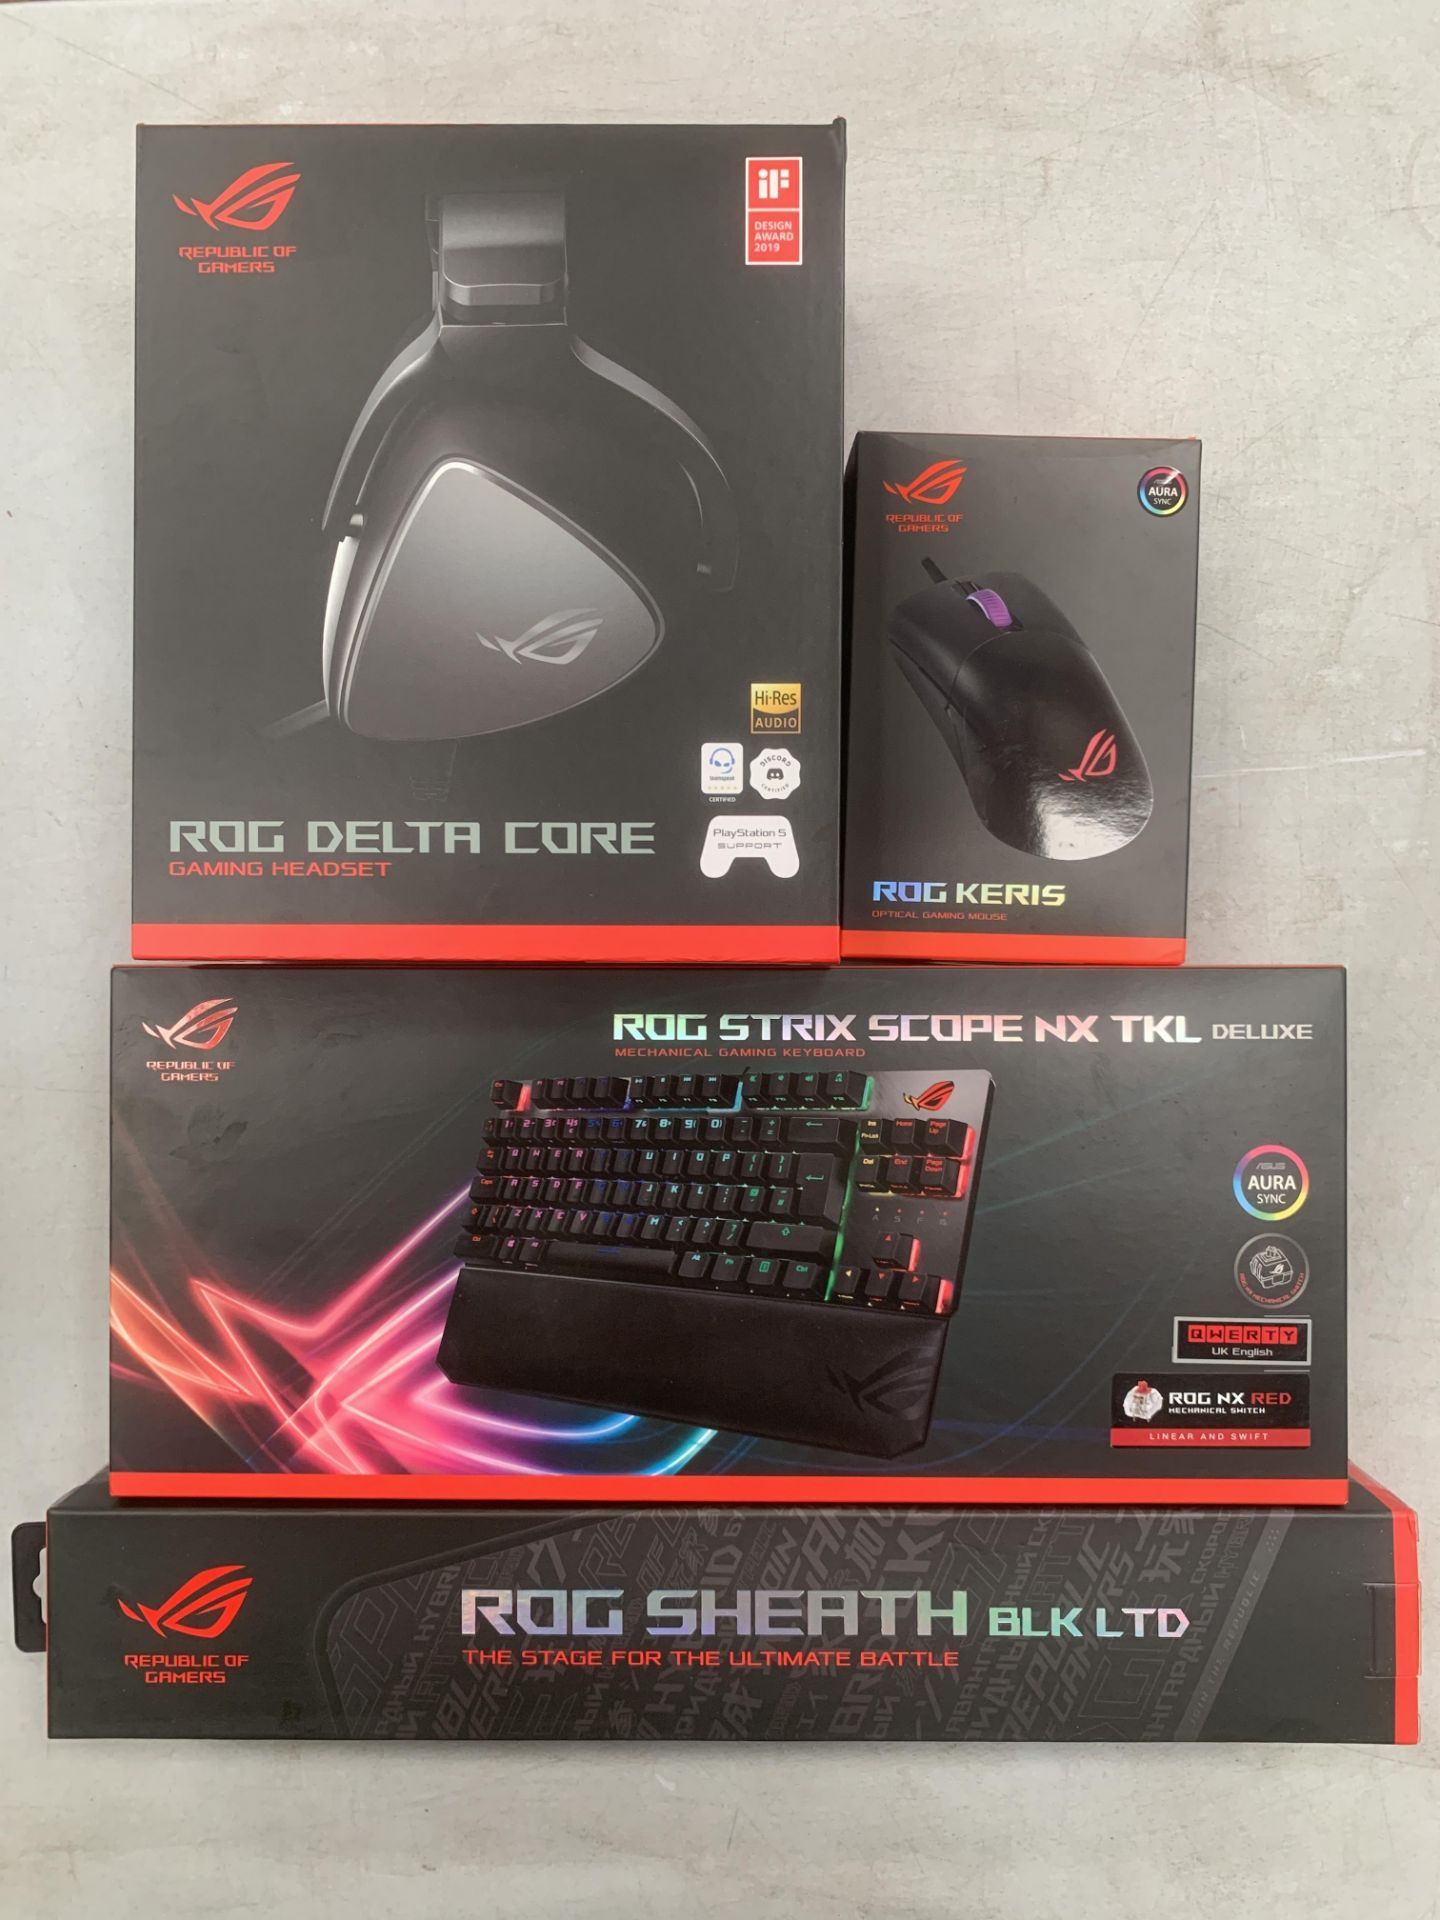 Asus Republic of Gamers Mouse, Keyboard, Desk Sheath and headset - all boxed